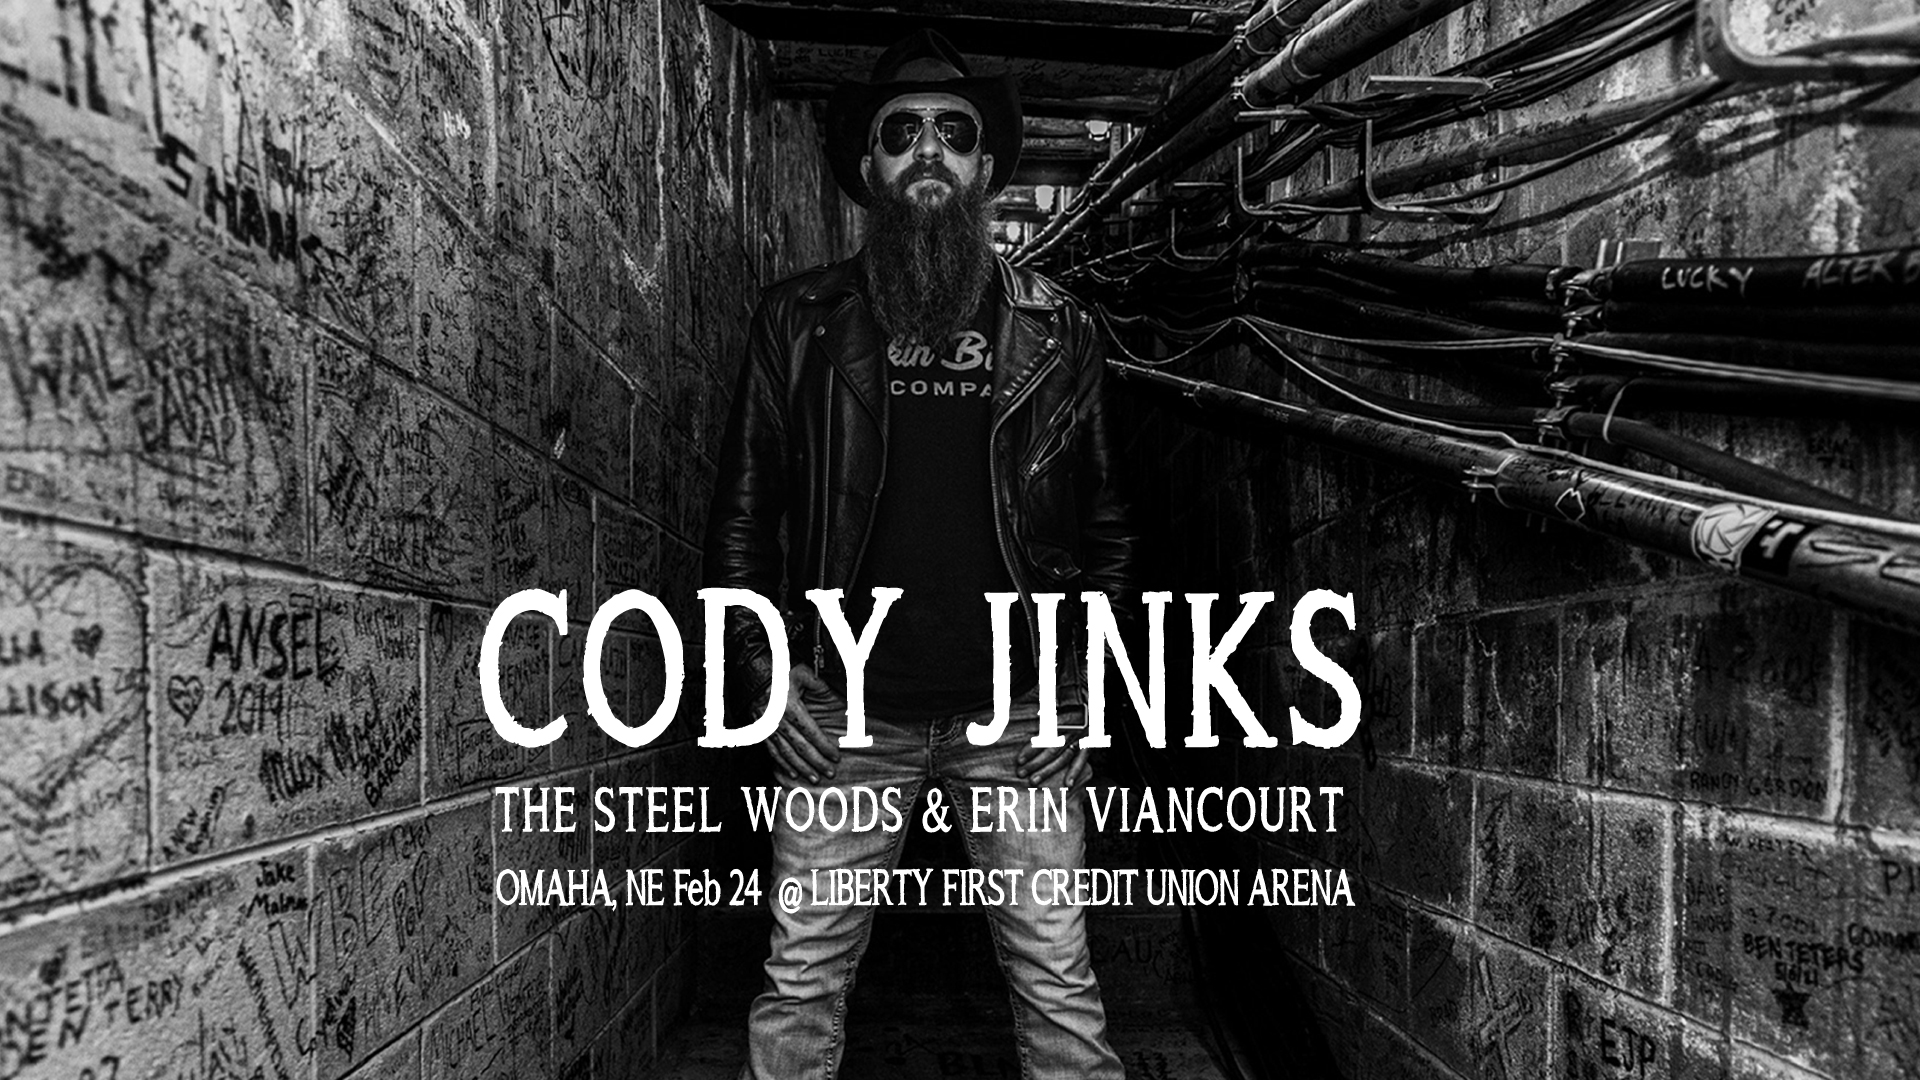 <h1 class="tribe-events-single-event-title">Cody Jinks @ LFCU Arena</h1>